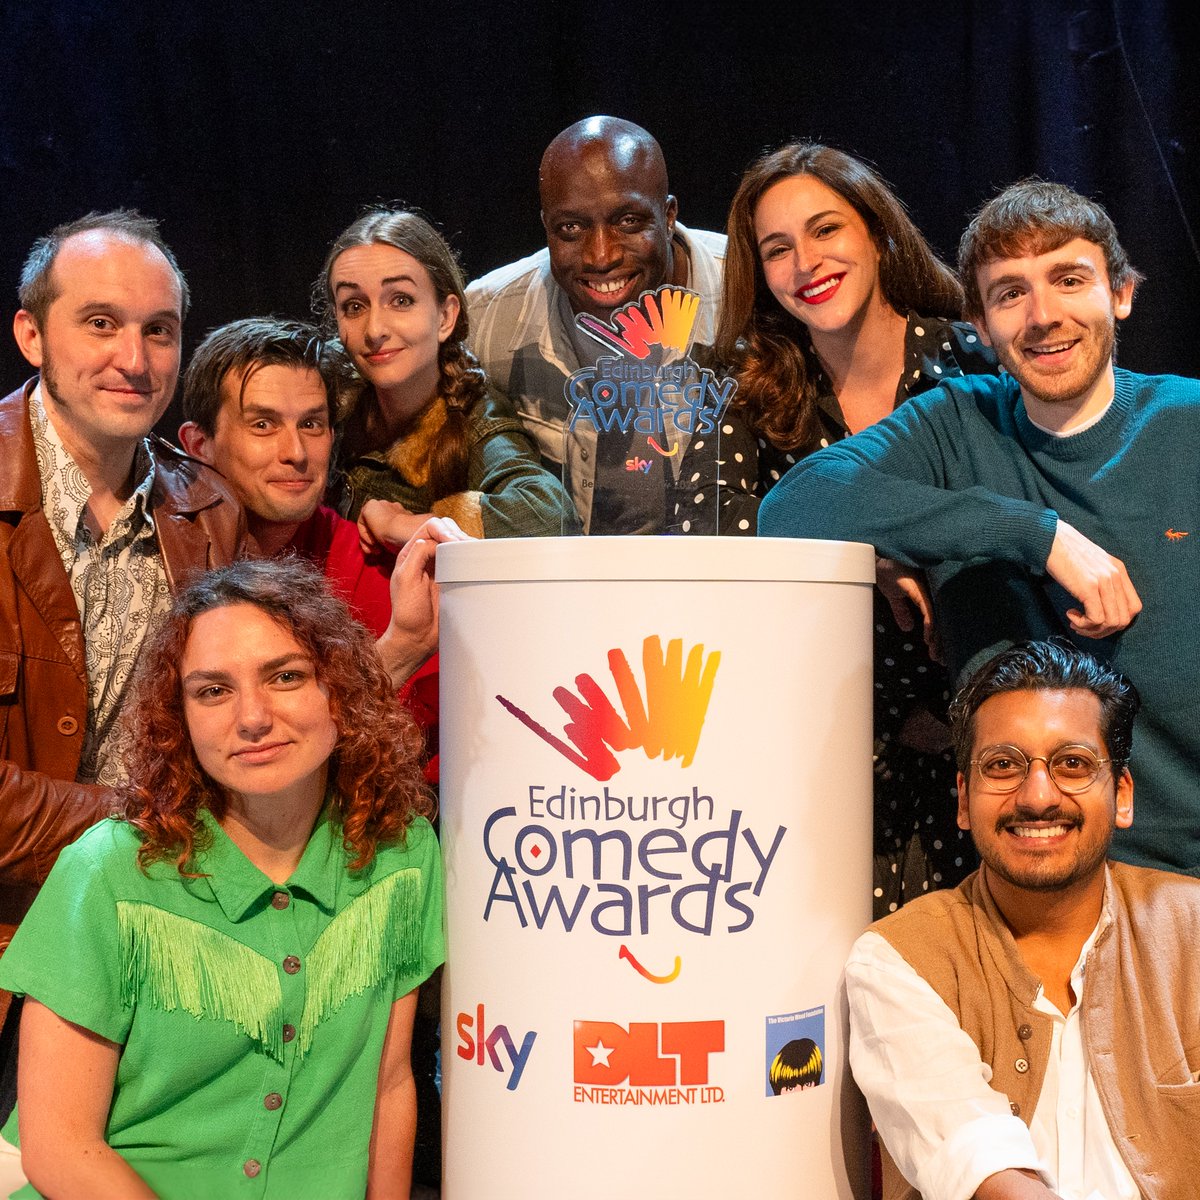 Do you want to go to the Edinburgh Festival Fringe for free? Can you handle more than 100 hours of comedy in 2 weeks? We're offering you the chance to be an Edinburgh Comedy Award Panellist! Follow the link for more info and apply before 2pm on 15th May. comedyawards.co.uk/the-panel/comp…